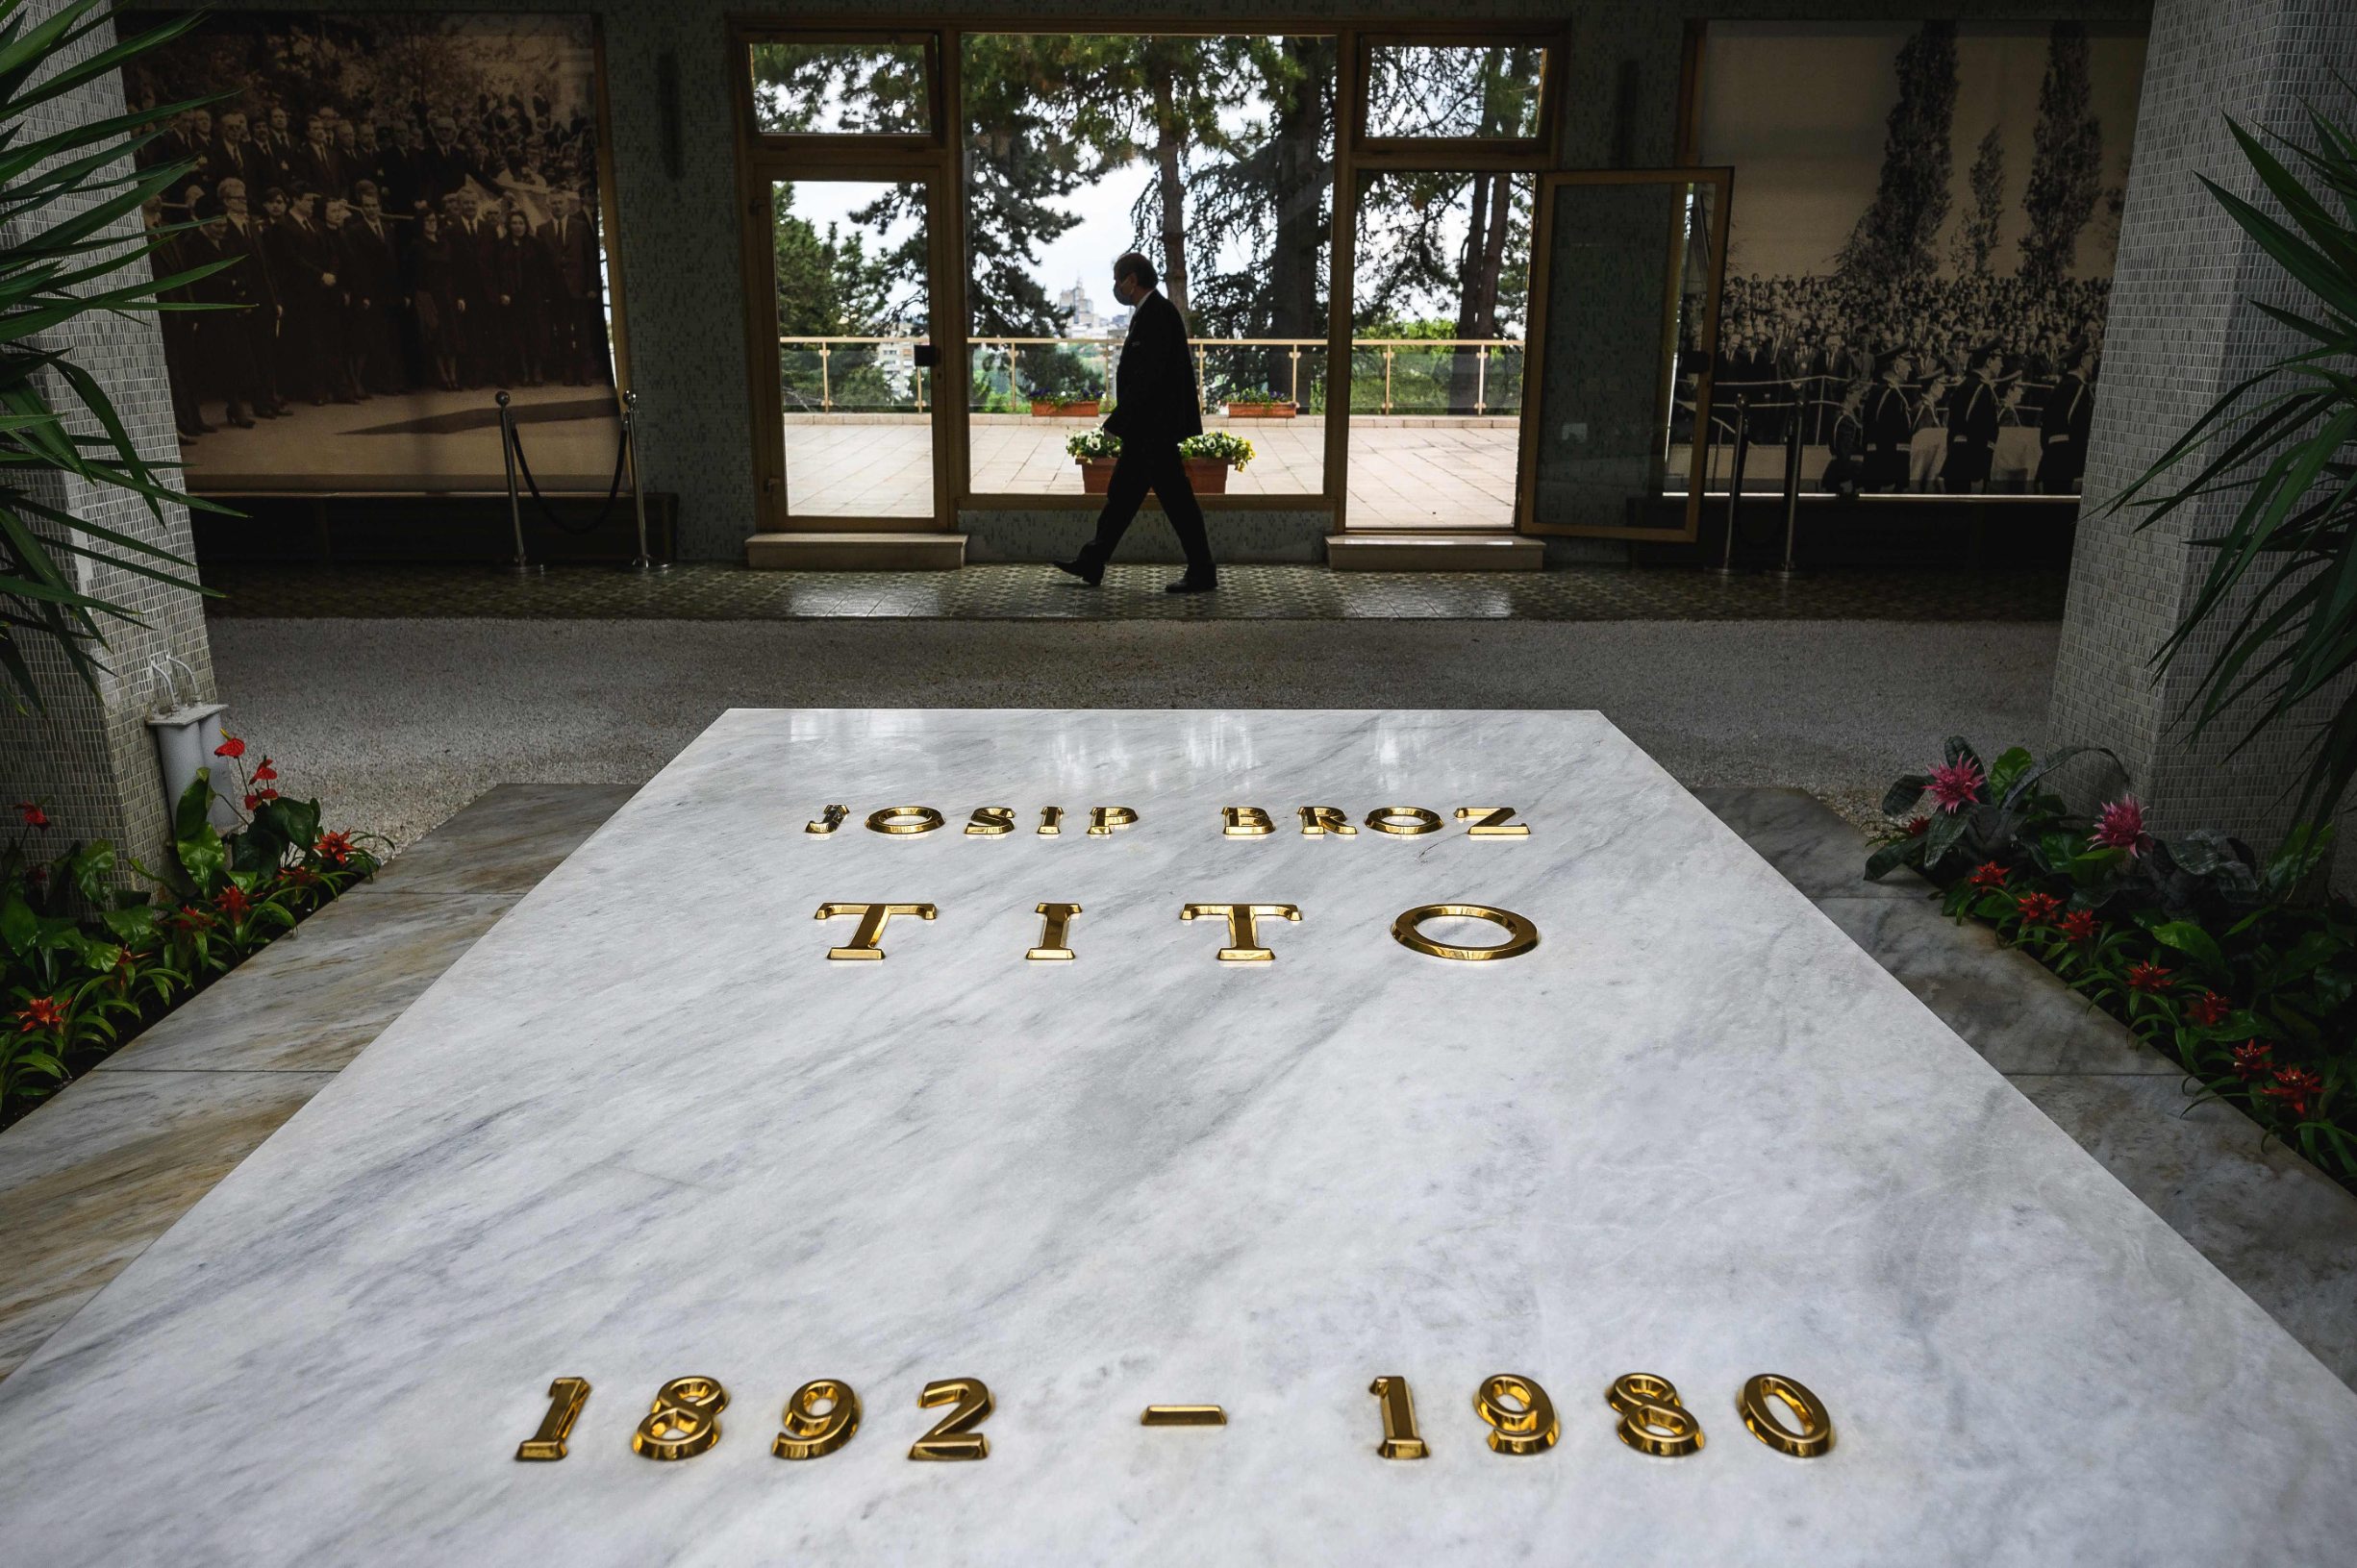 A security staff walks past the tomb of Josip Broz Tito (18921980), former President of communist Yugoslavia, at his resting place inside of the 